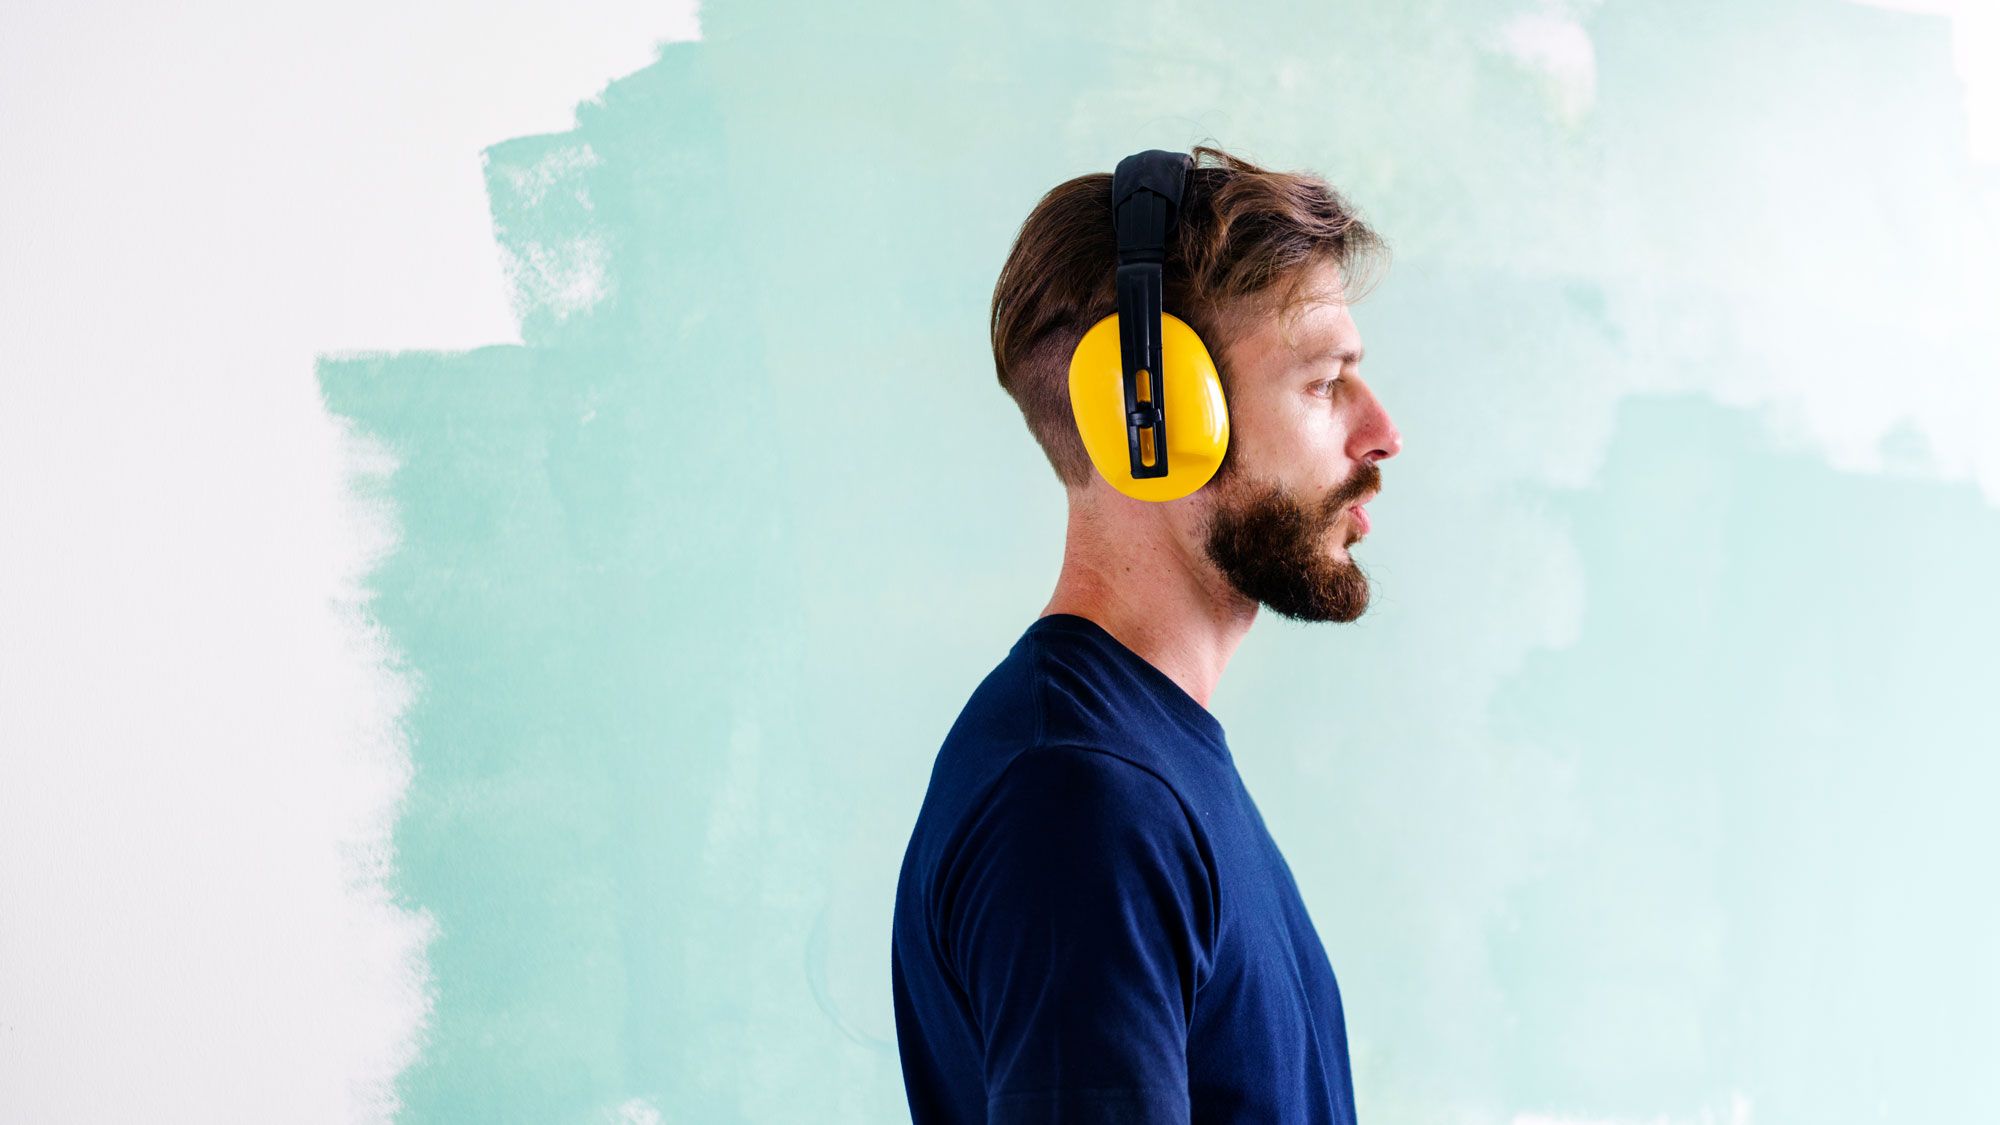 Man renovating his home with earmuffs on